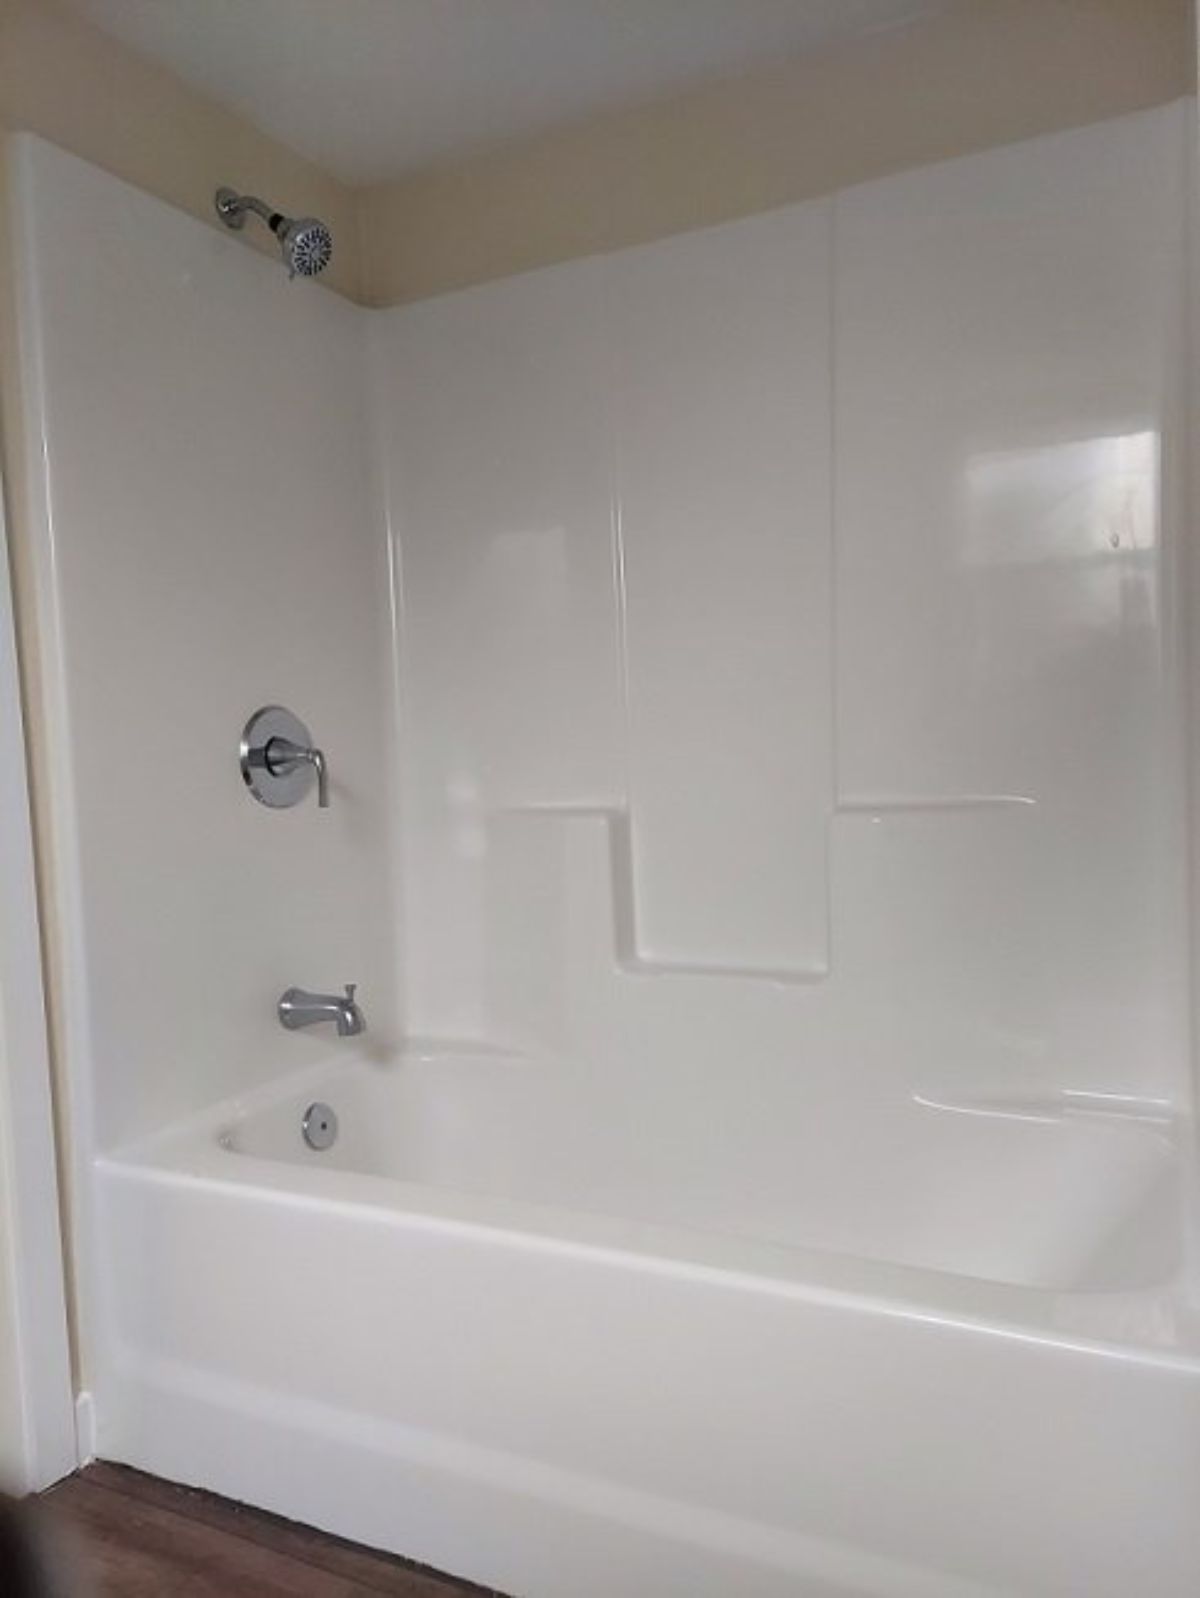 Shower and bathtub in bathroom of 24’ tiny house on wheels